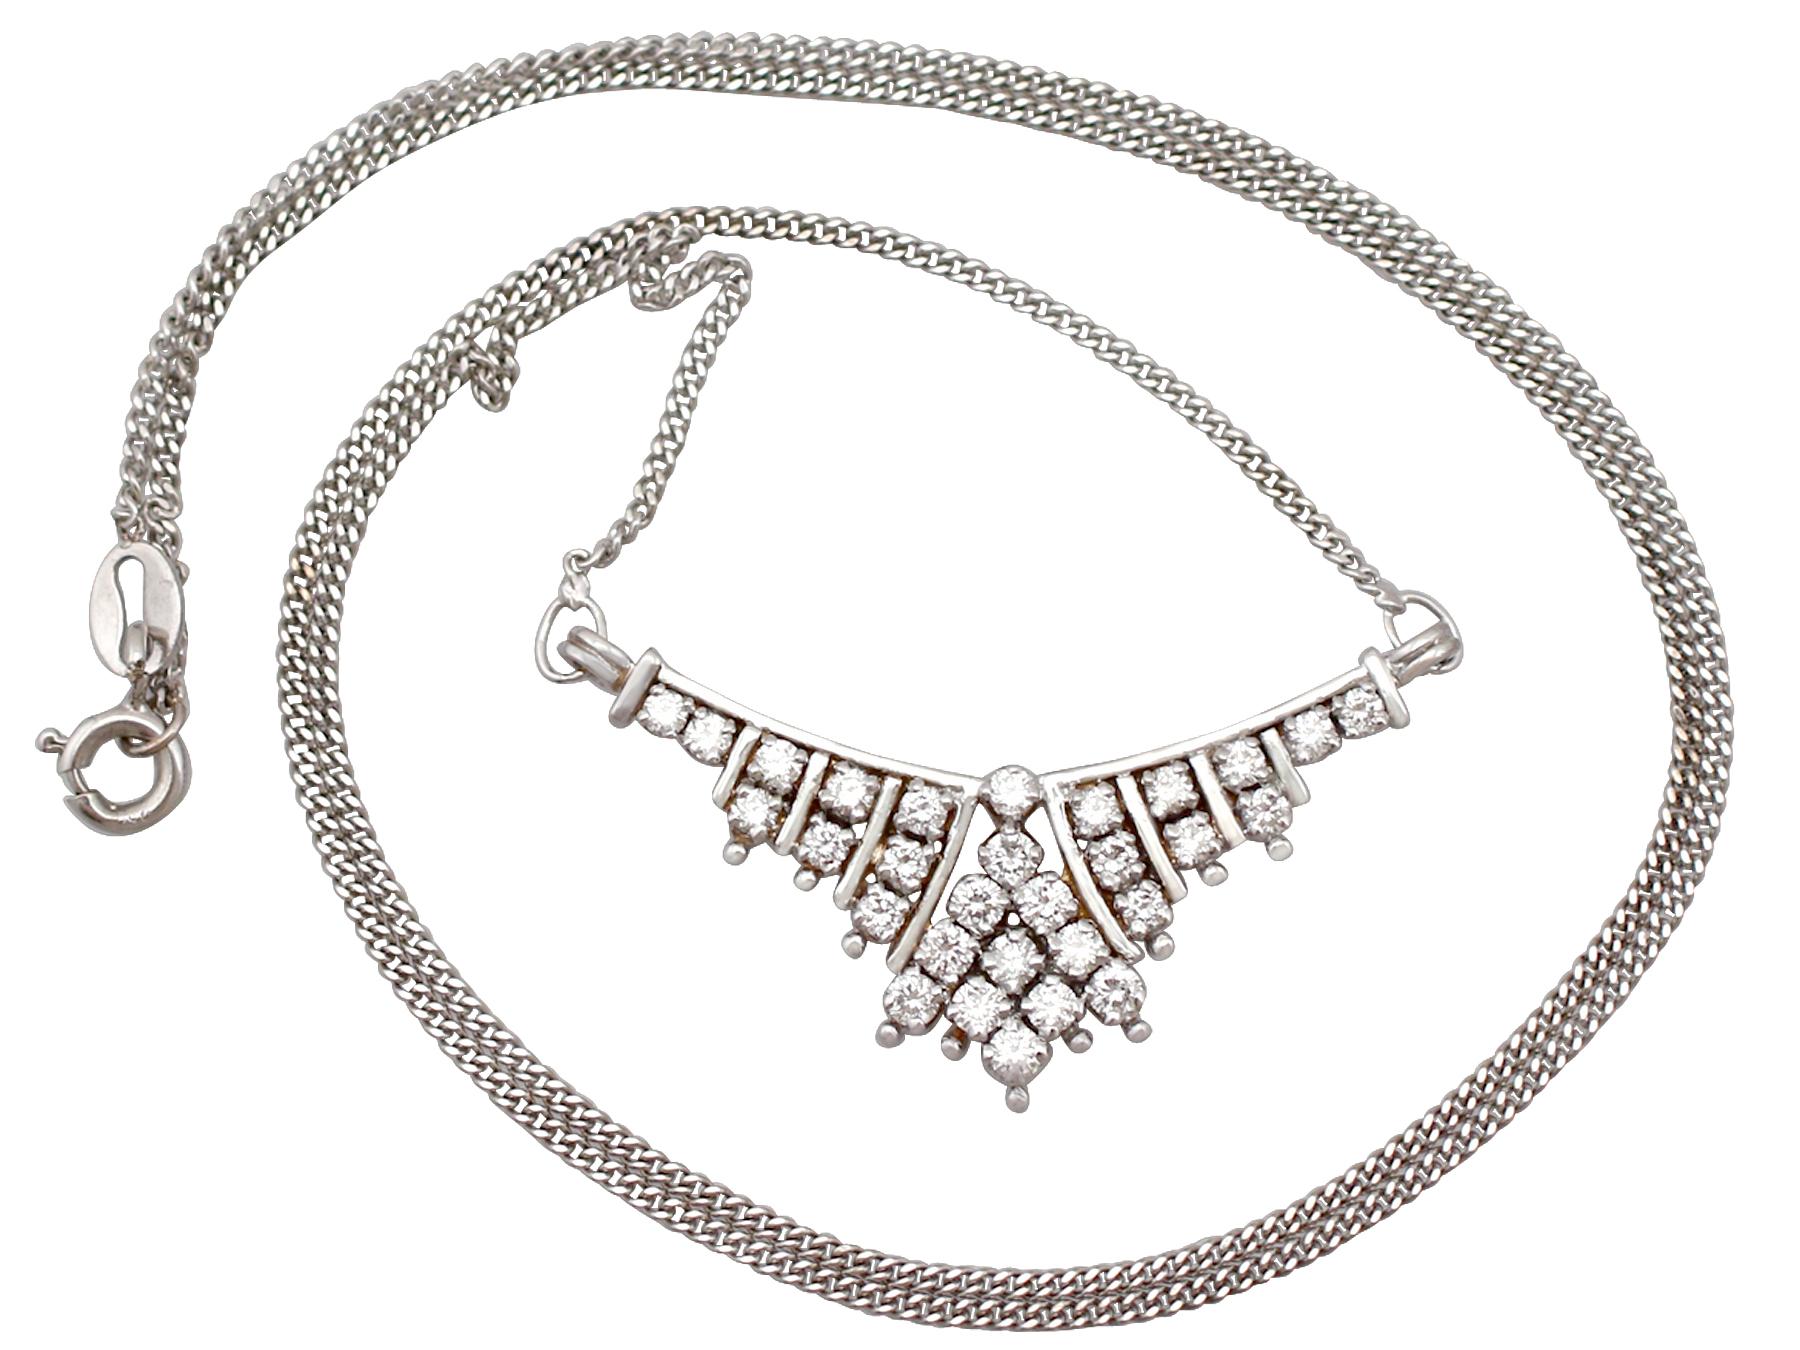 A fine and impressive vintage Russian 1.02 carat diamond and 18 karat white gold necklace; part of our diverse vintage jewelry and estate jewelry collections.

This fine and impressive vintage diamond necklace has been crafted in 18k white